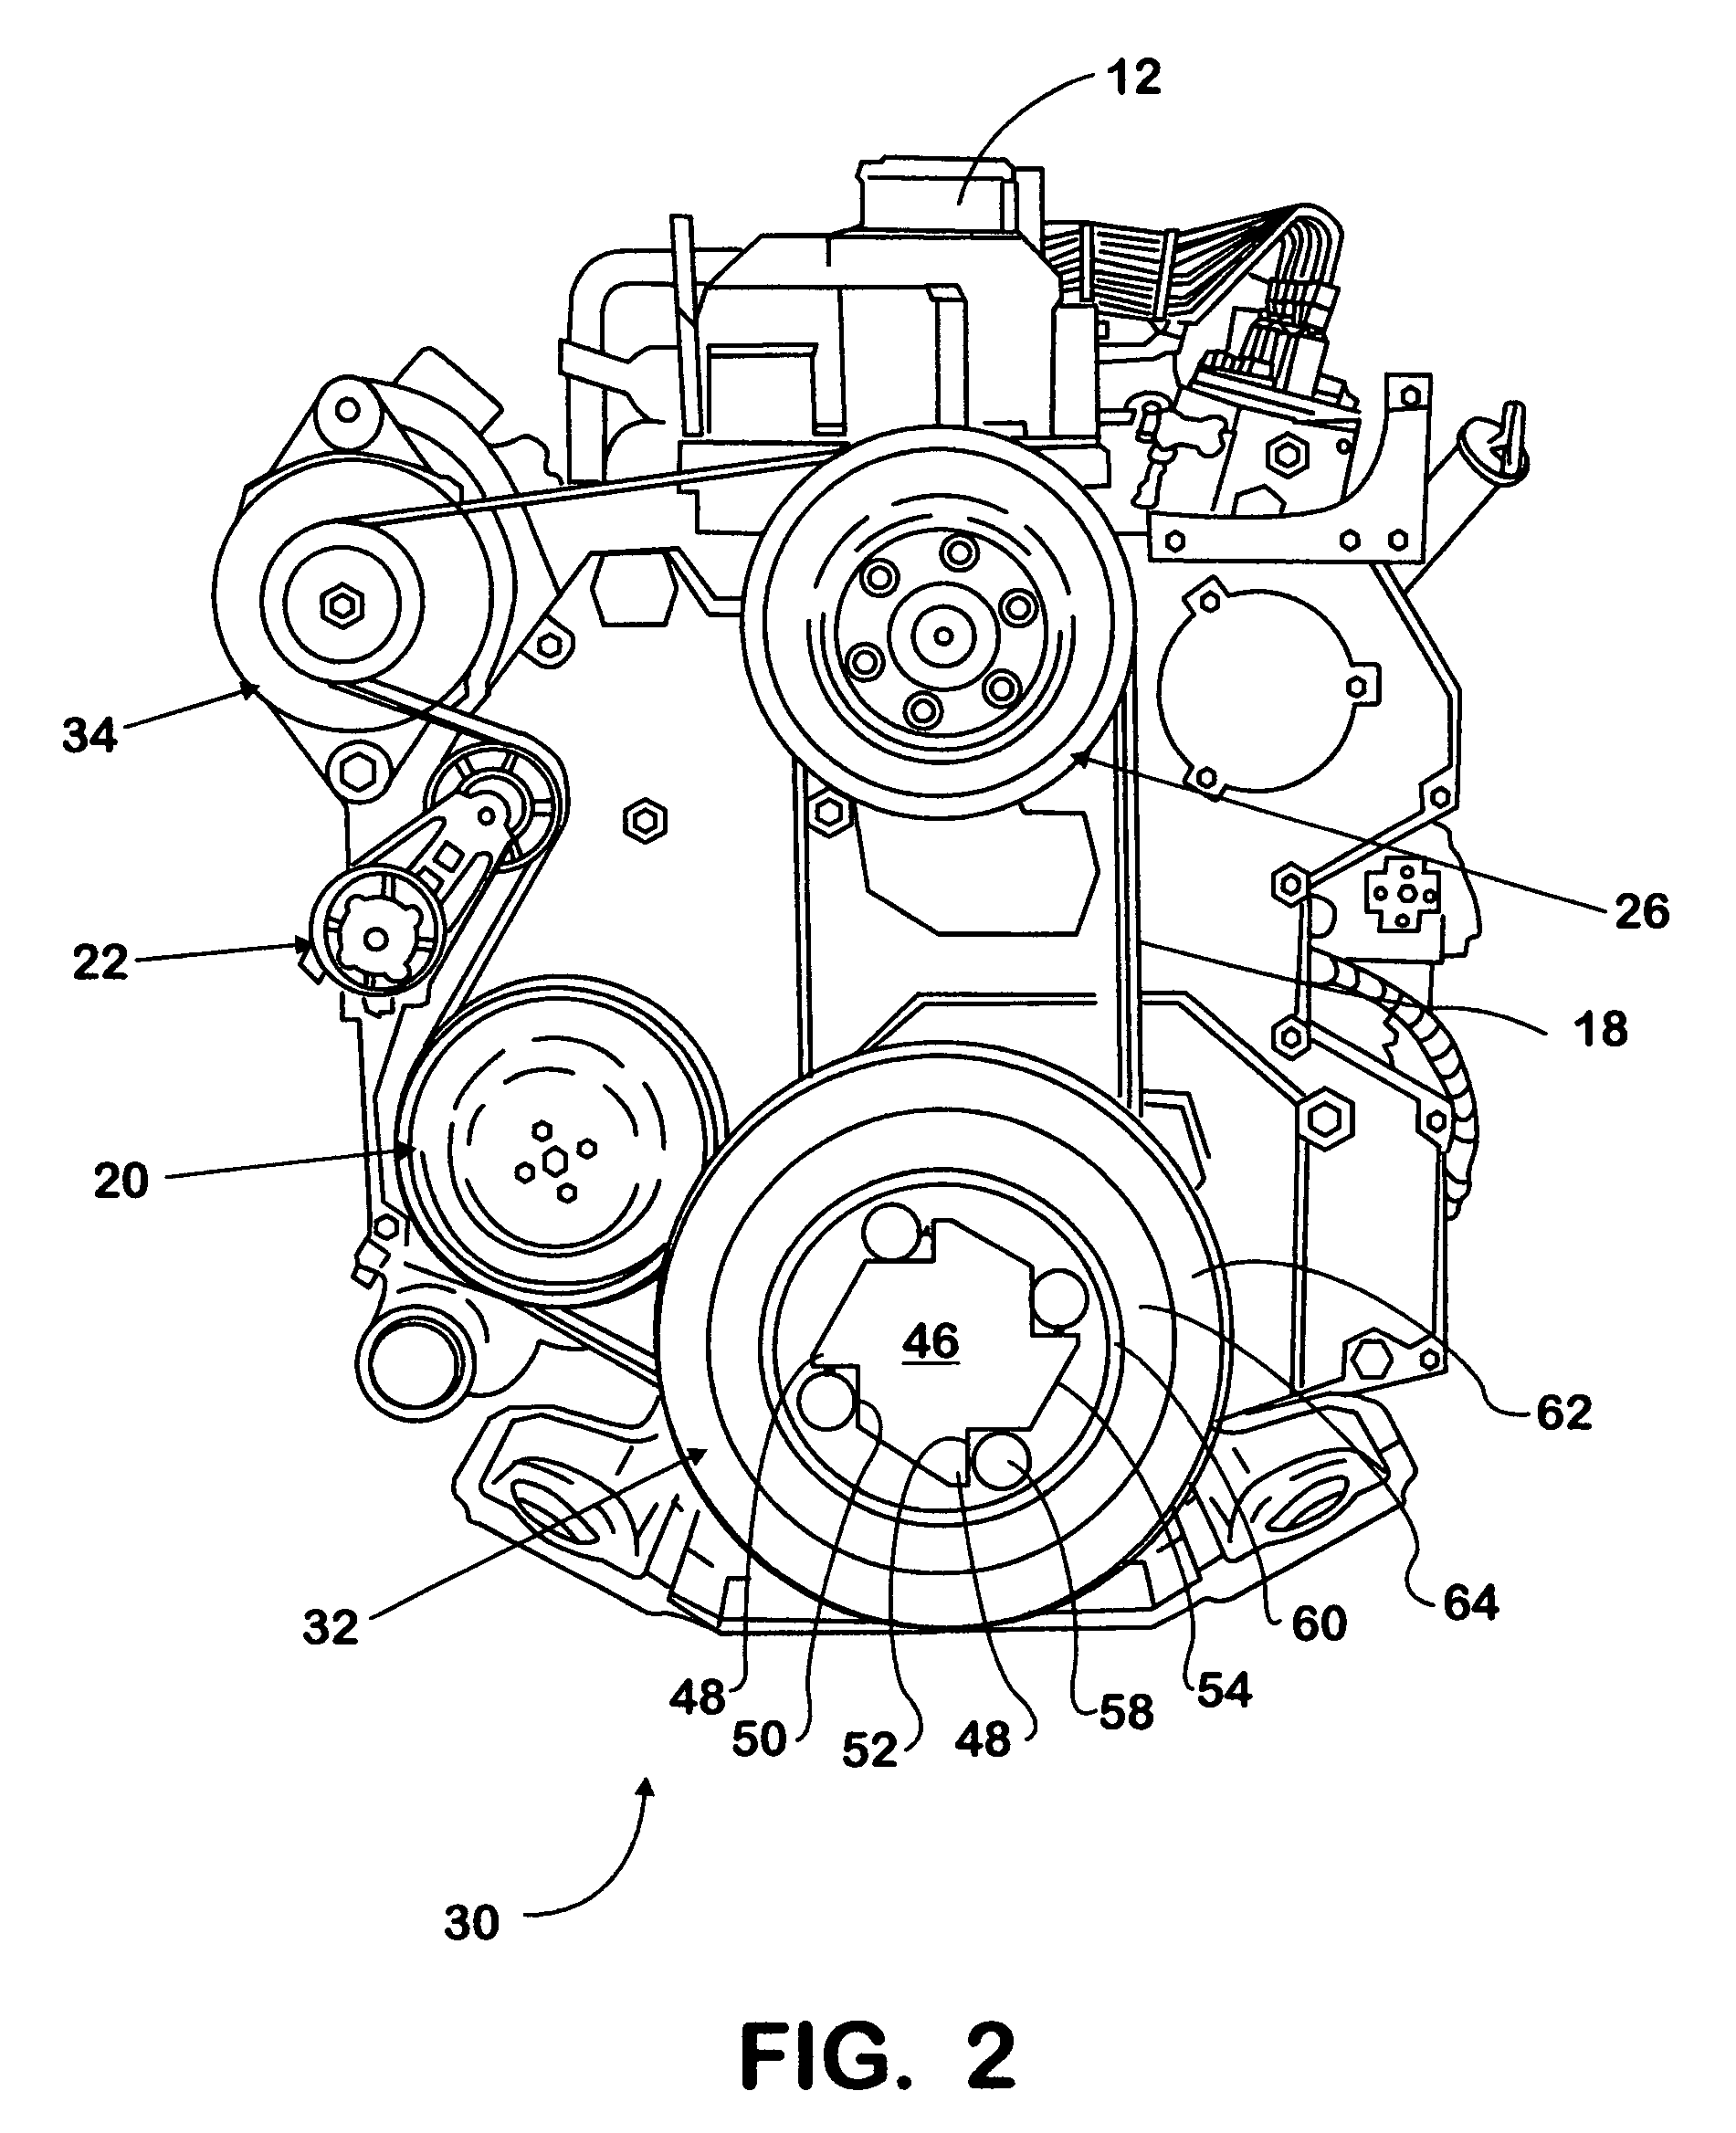 Vehicle electrification using a clutched vibration damper